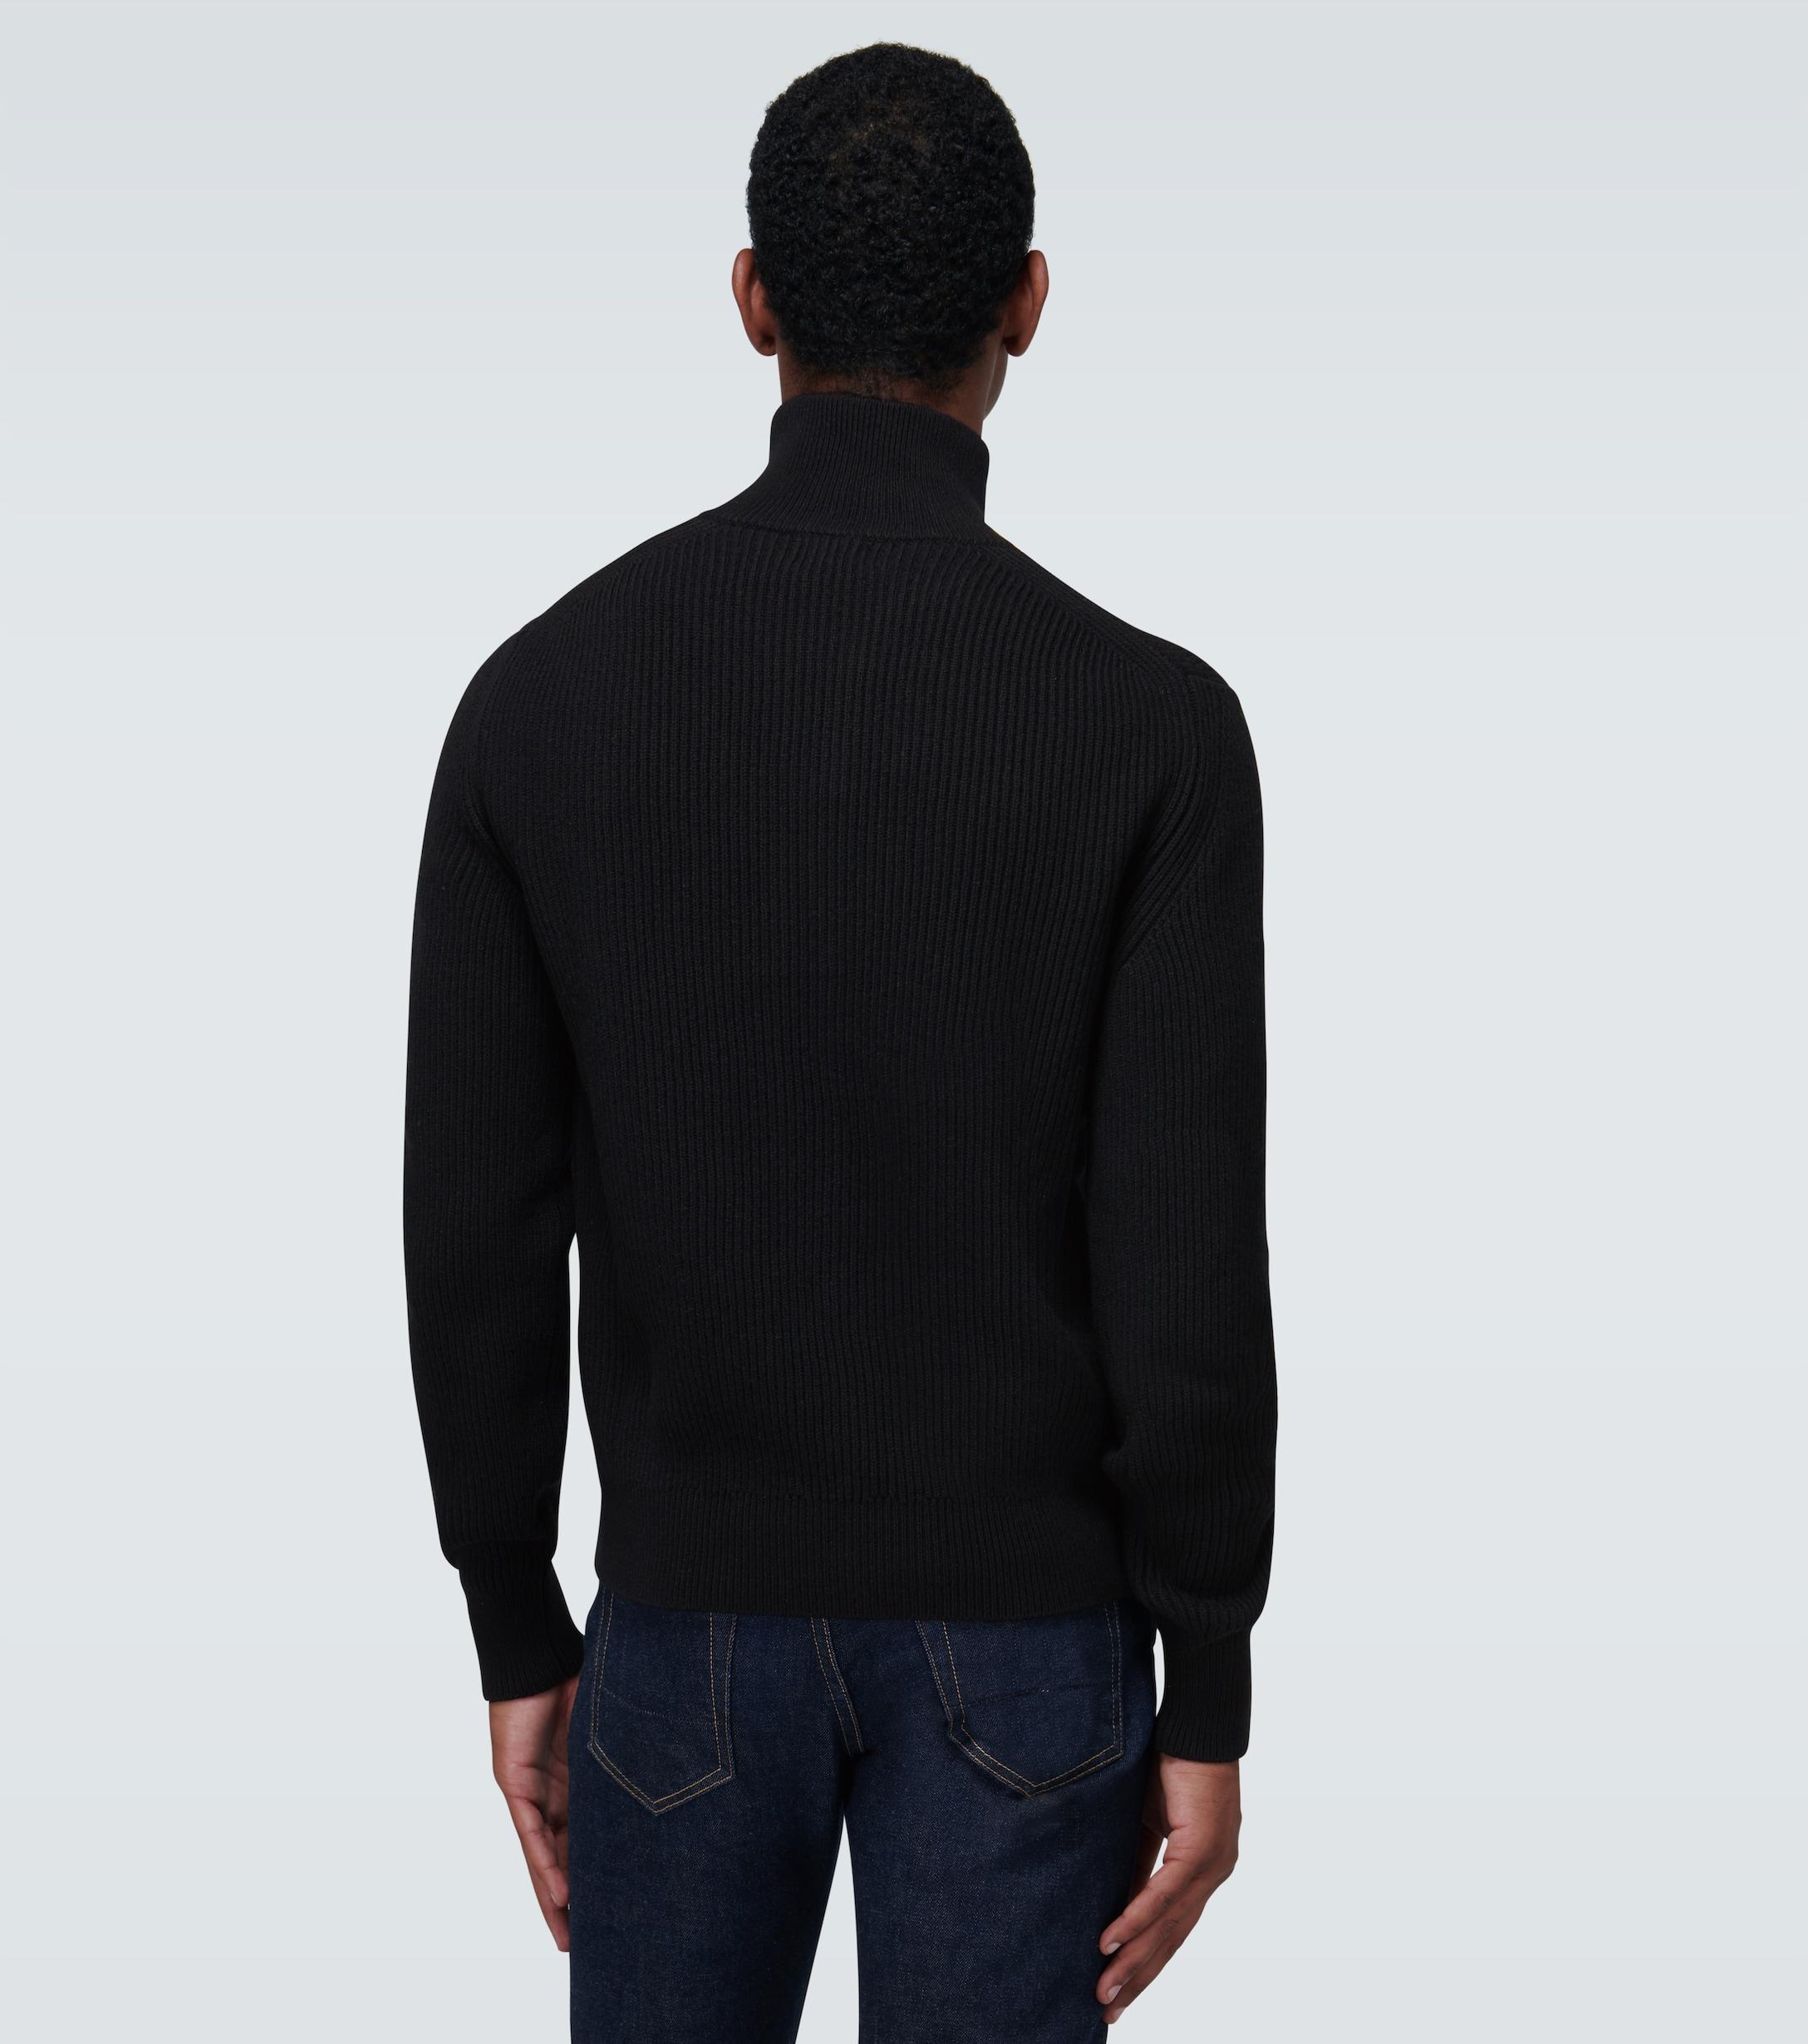 Tom Ford Zipped Cashmere Cardigan in Black - Lyst